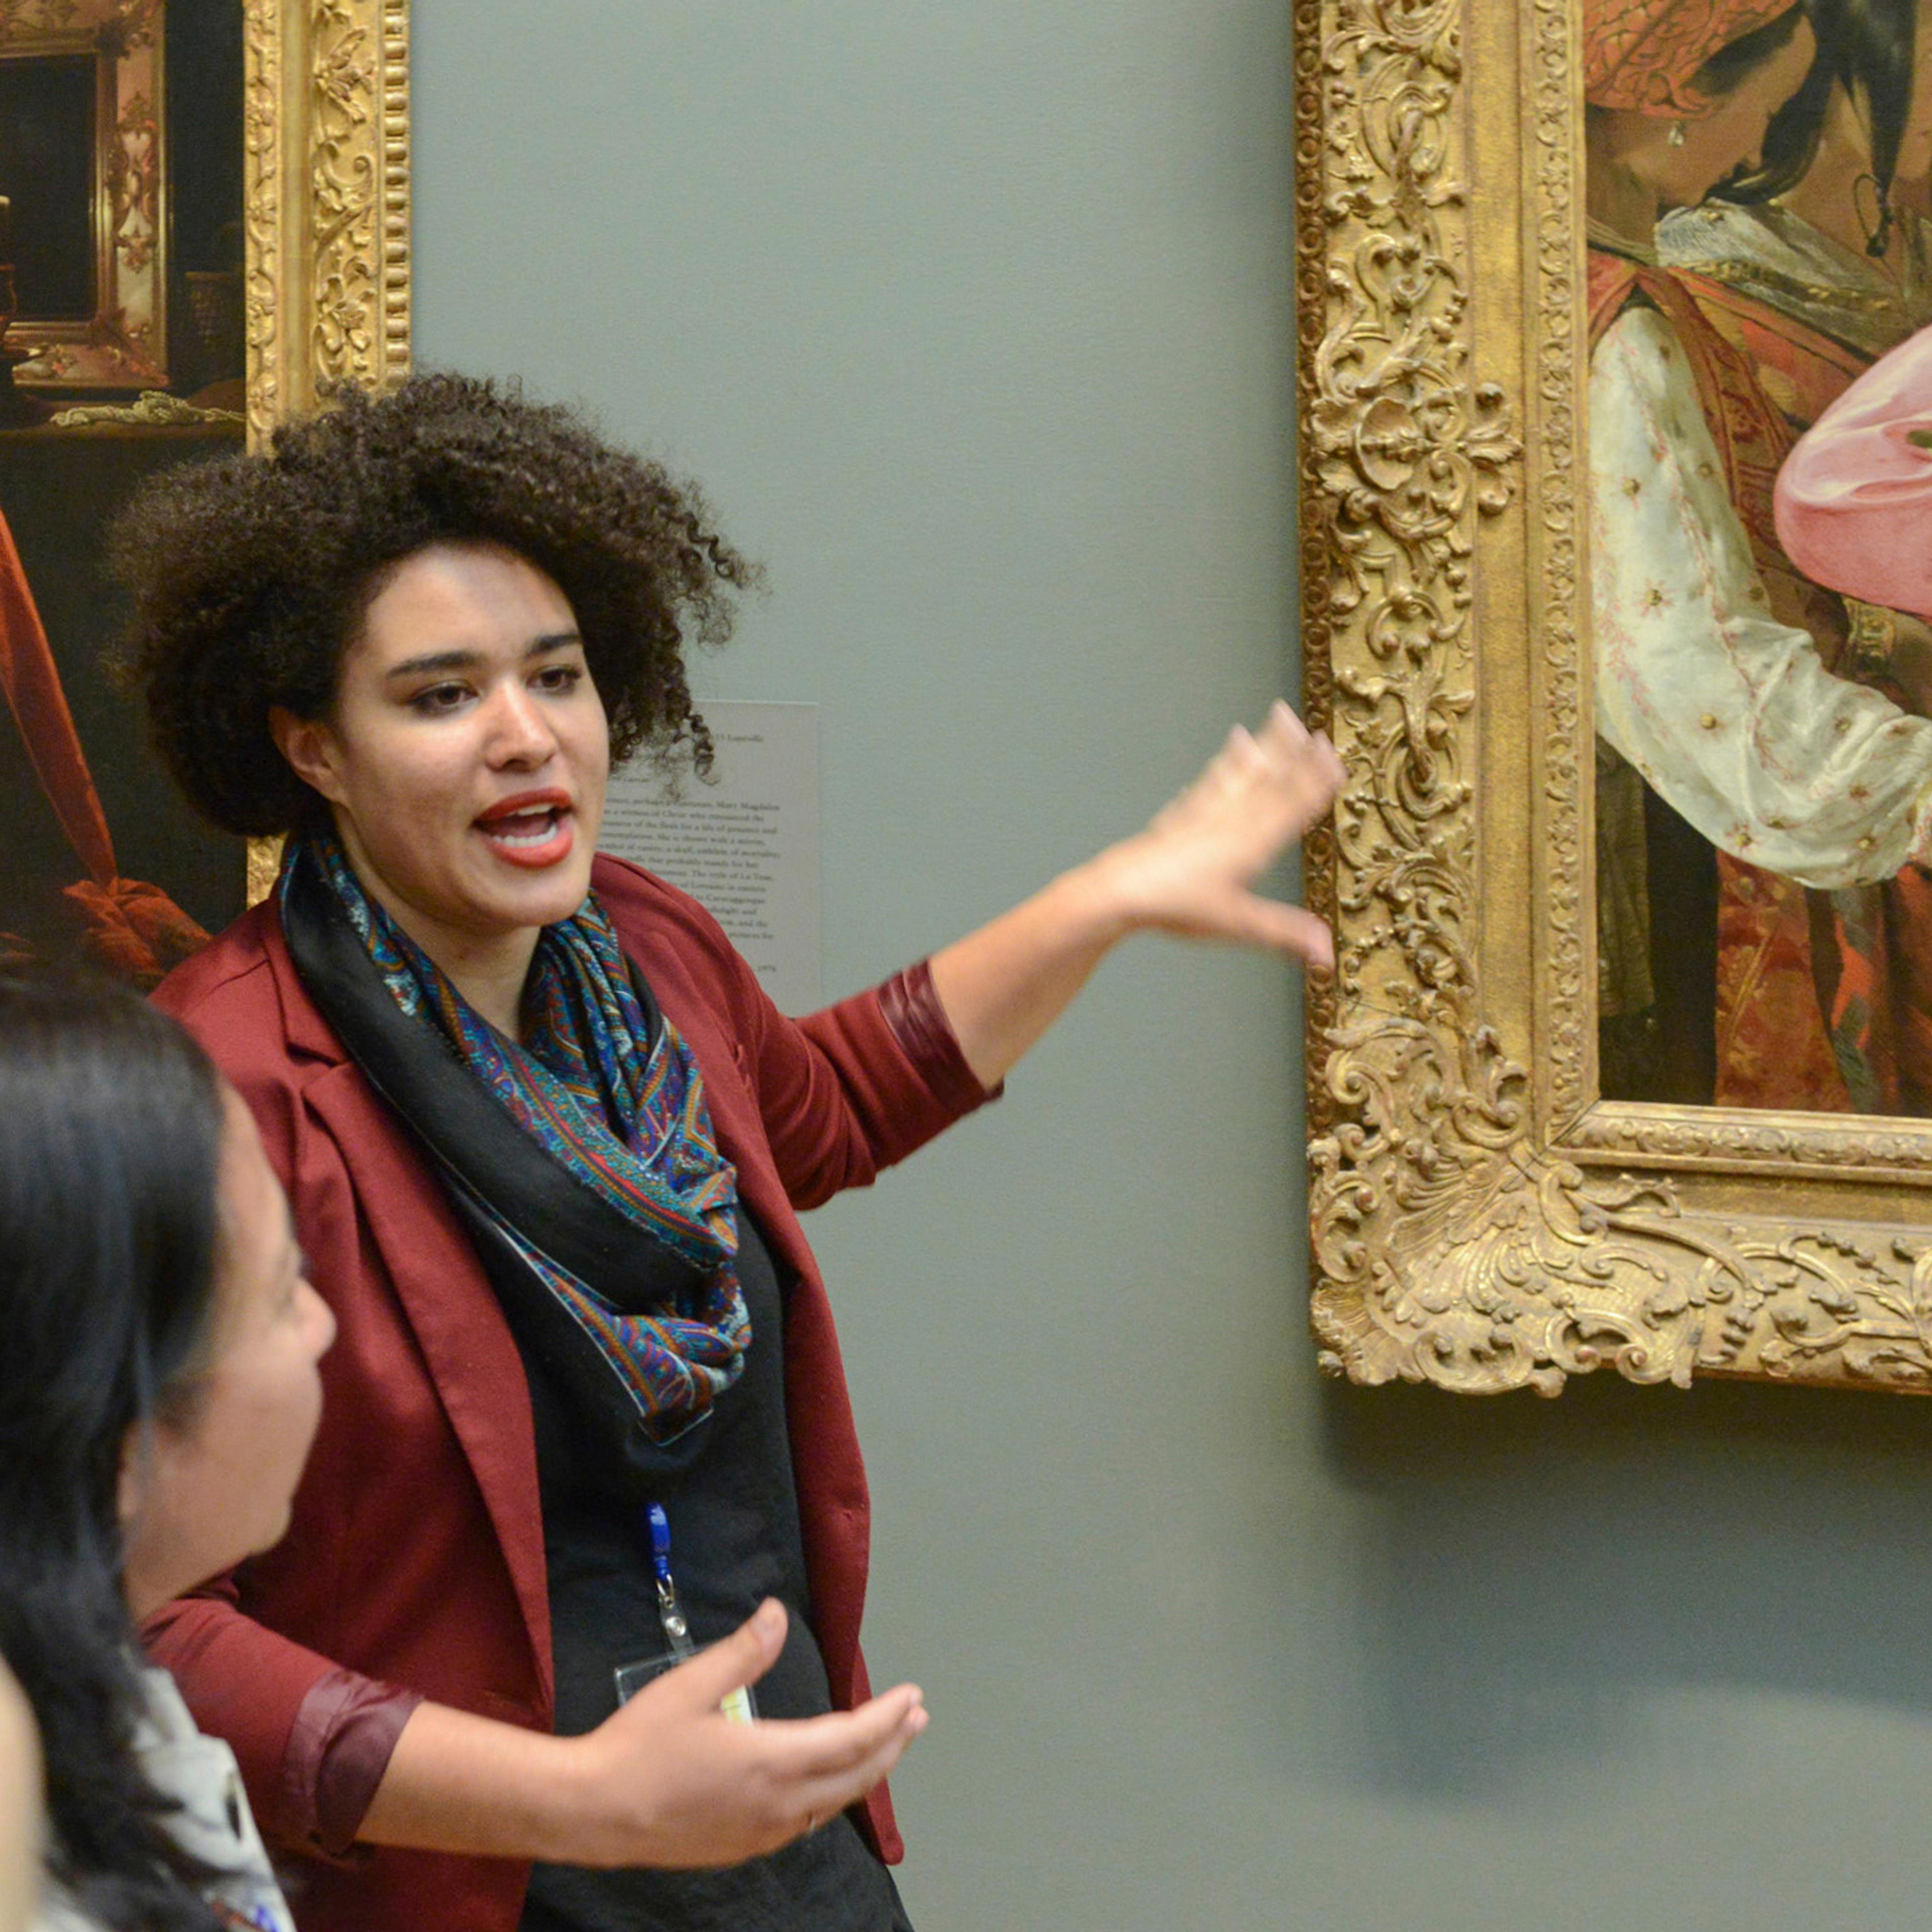 Tour Guide pointing to a painting and explaining the context to a group of visitors.